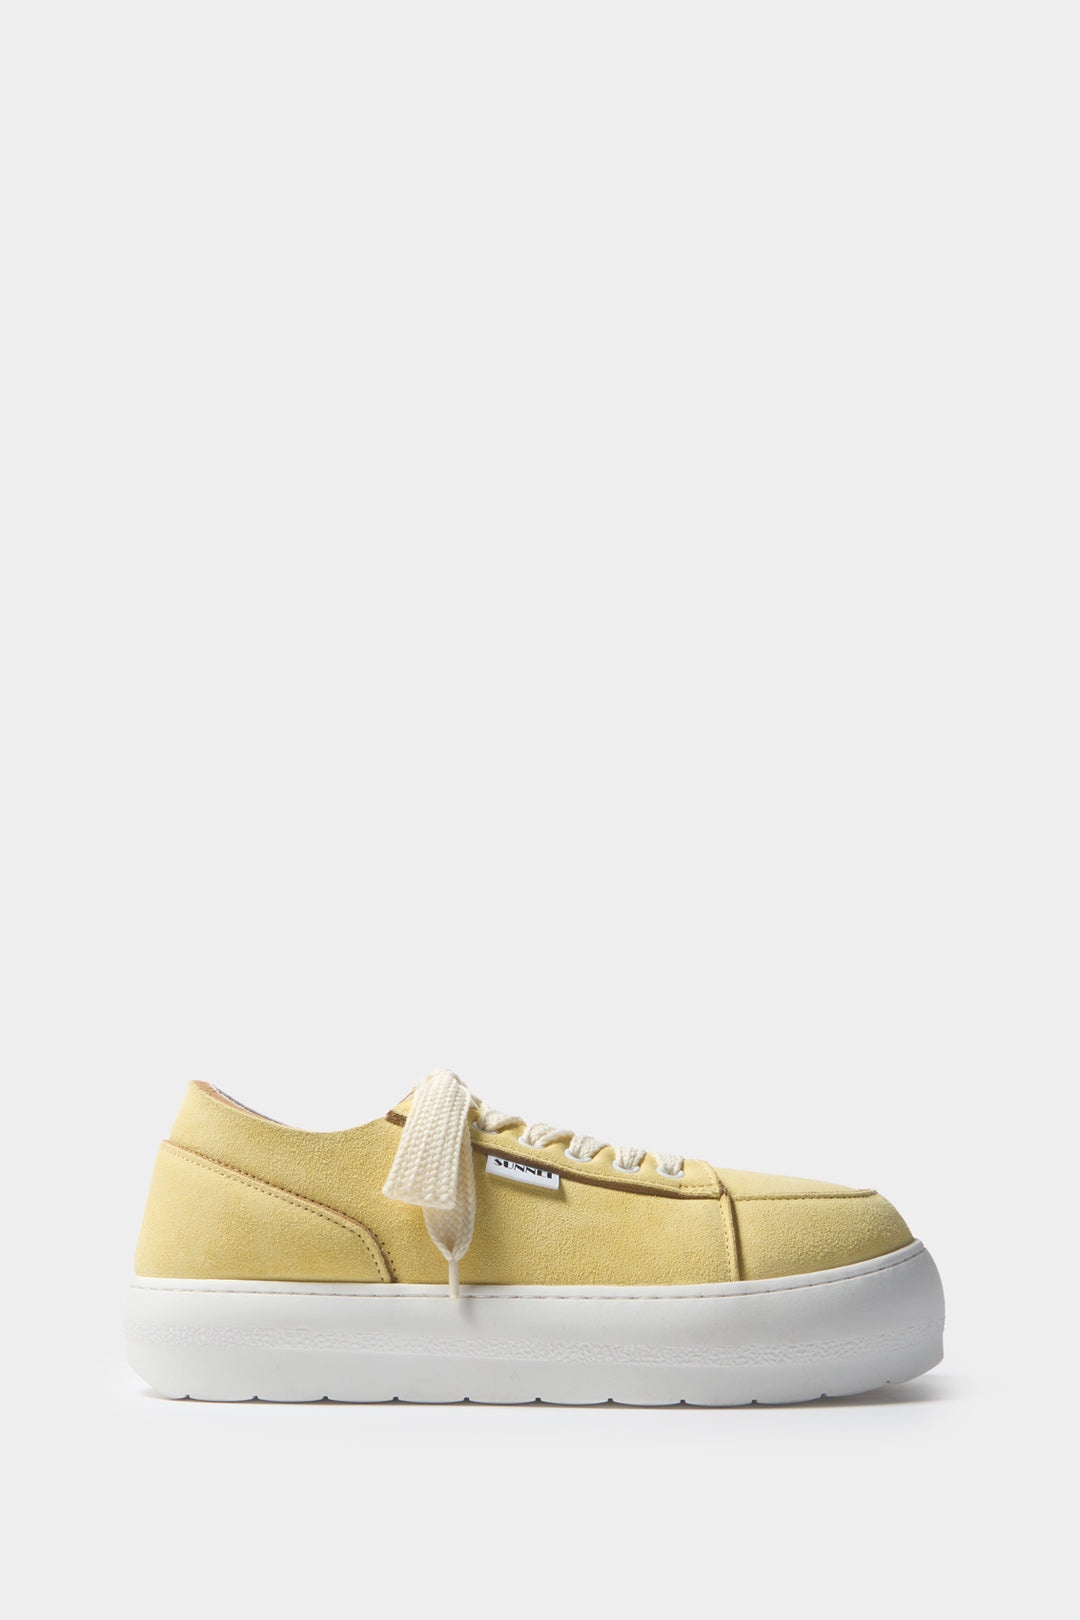 DREAMY SHOES / suede / light yellow - 1